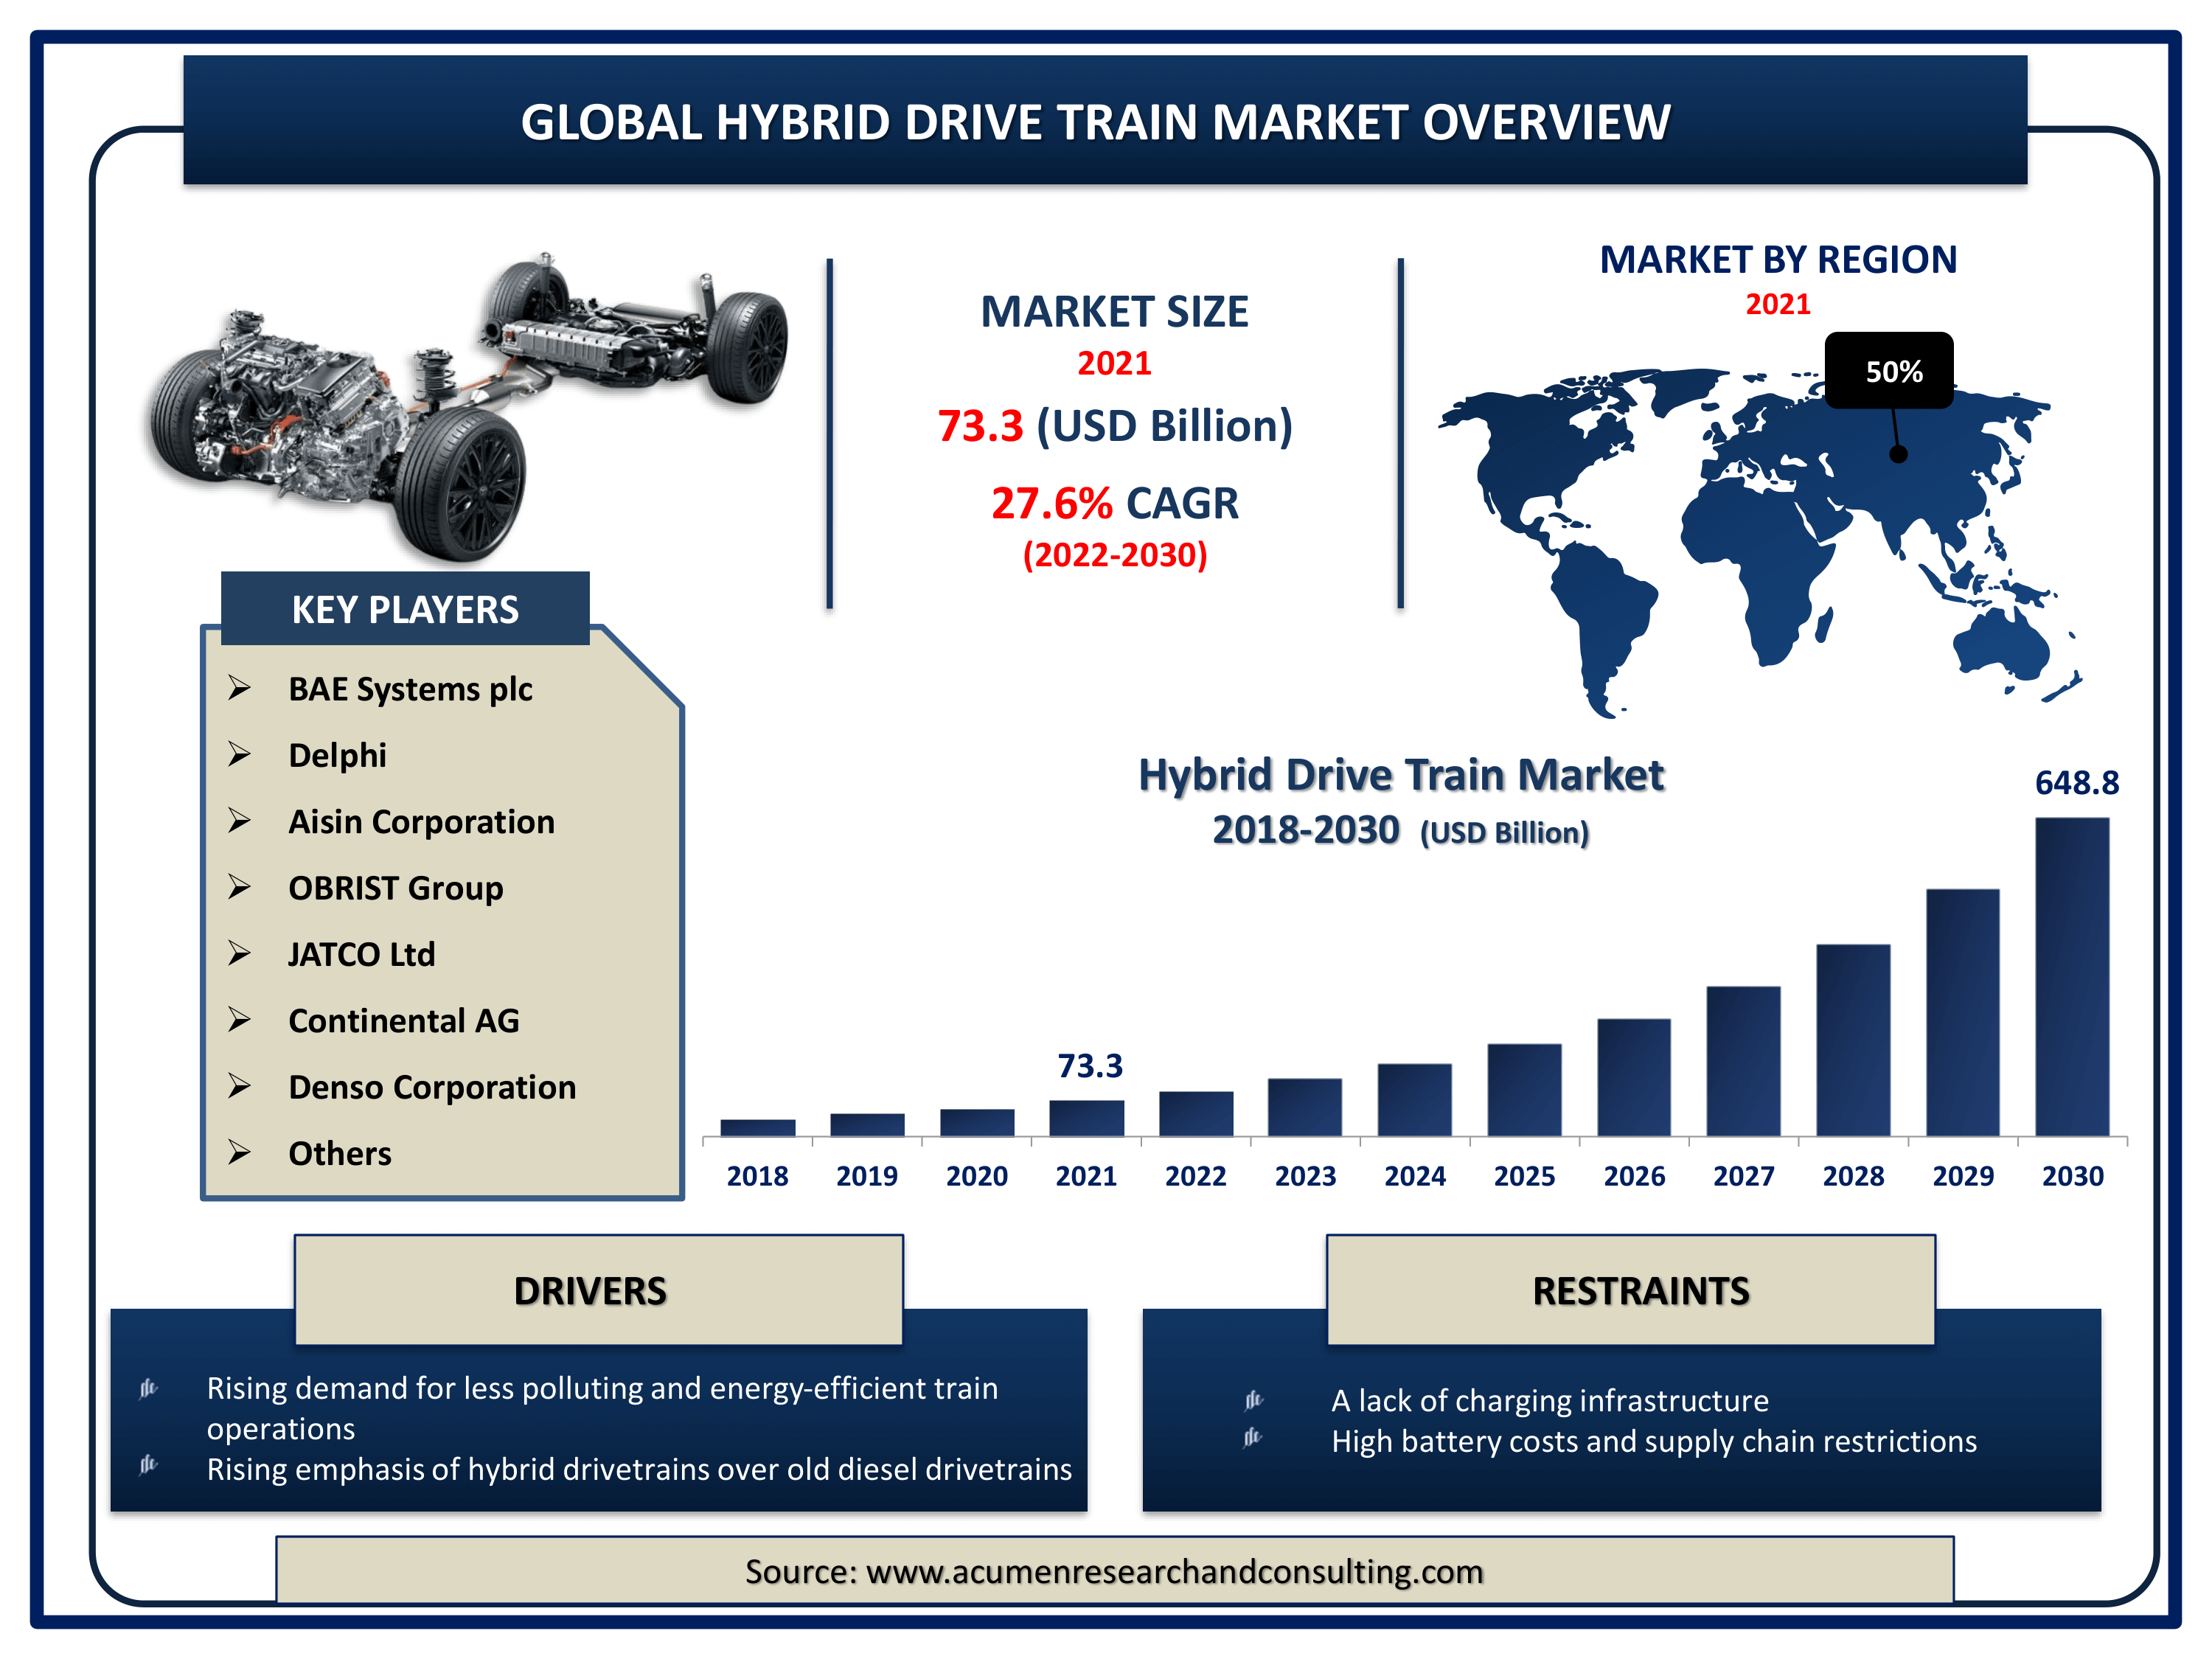 Global hybrid drive train market revenue is expected to increase by USD 648.8 Billion by 2030, with a 27.6% CAGR from 2022 to 2030.